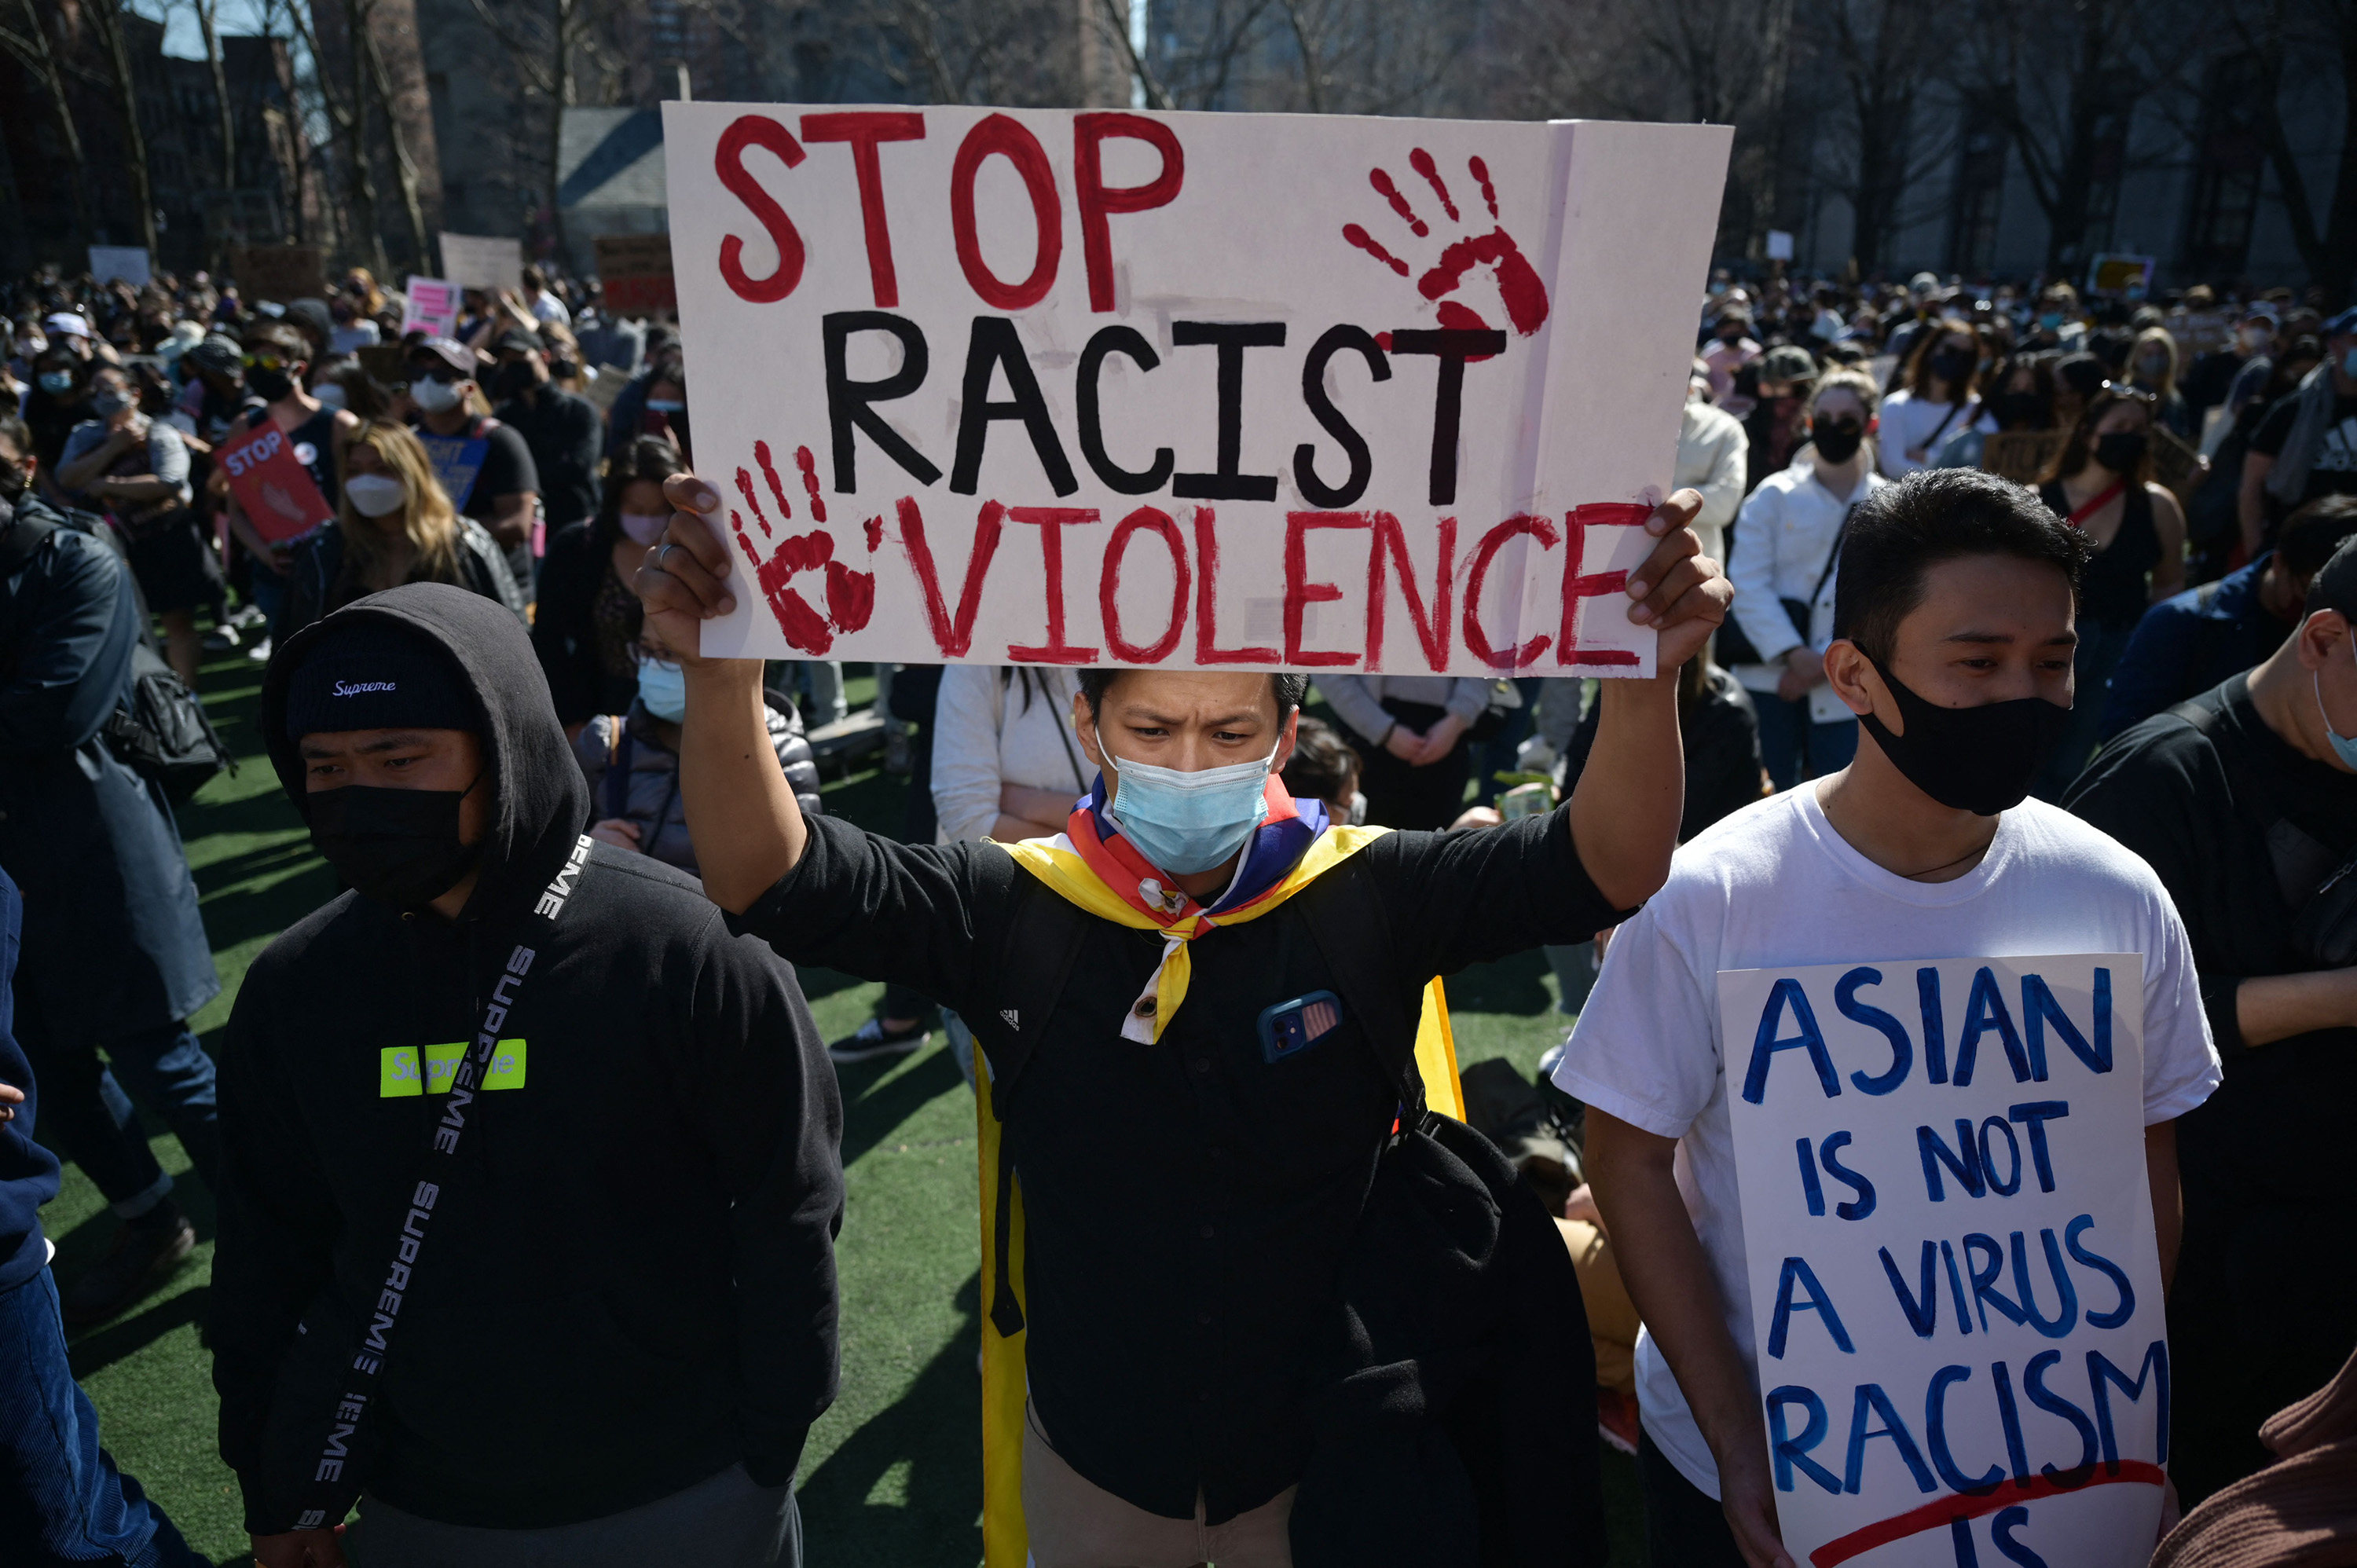 Members and supporters of the Asian-American community attend a rally against hate in New York City. File photo: AFP/Getty Images/TNS